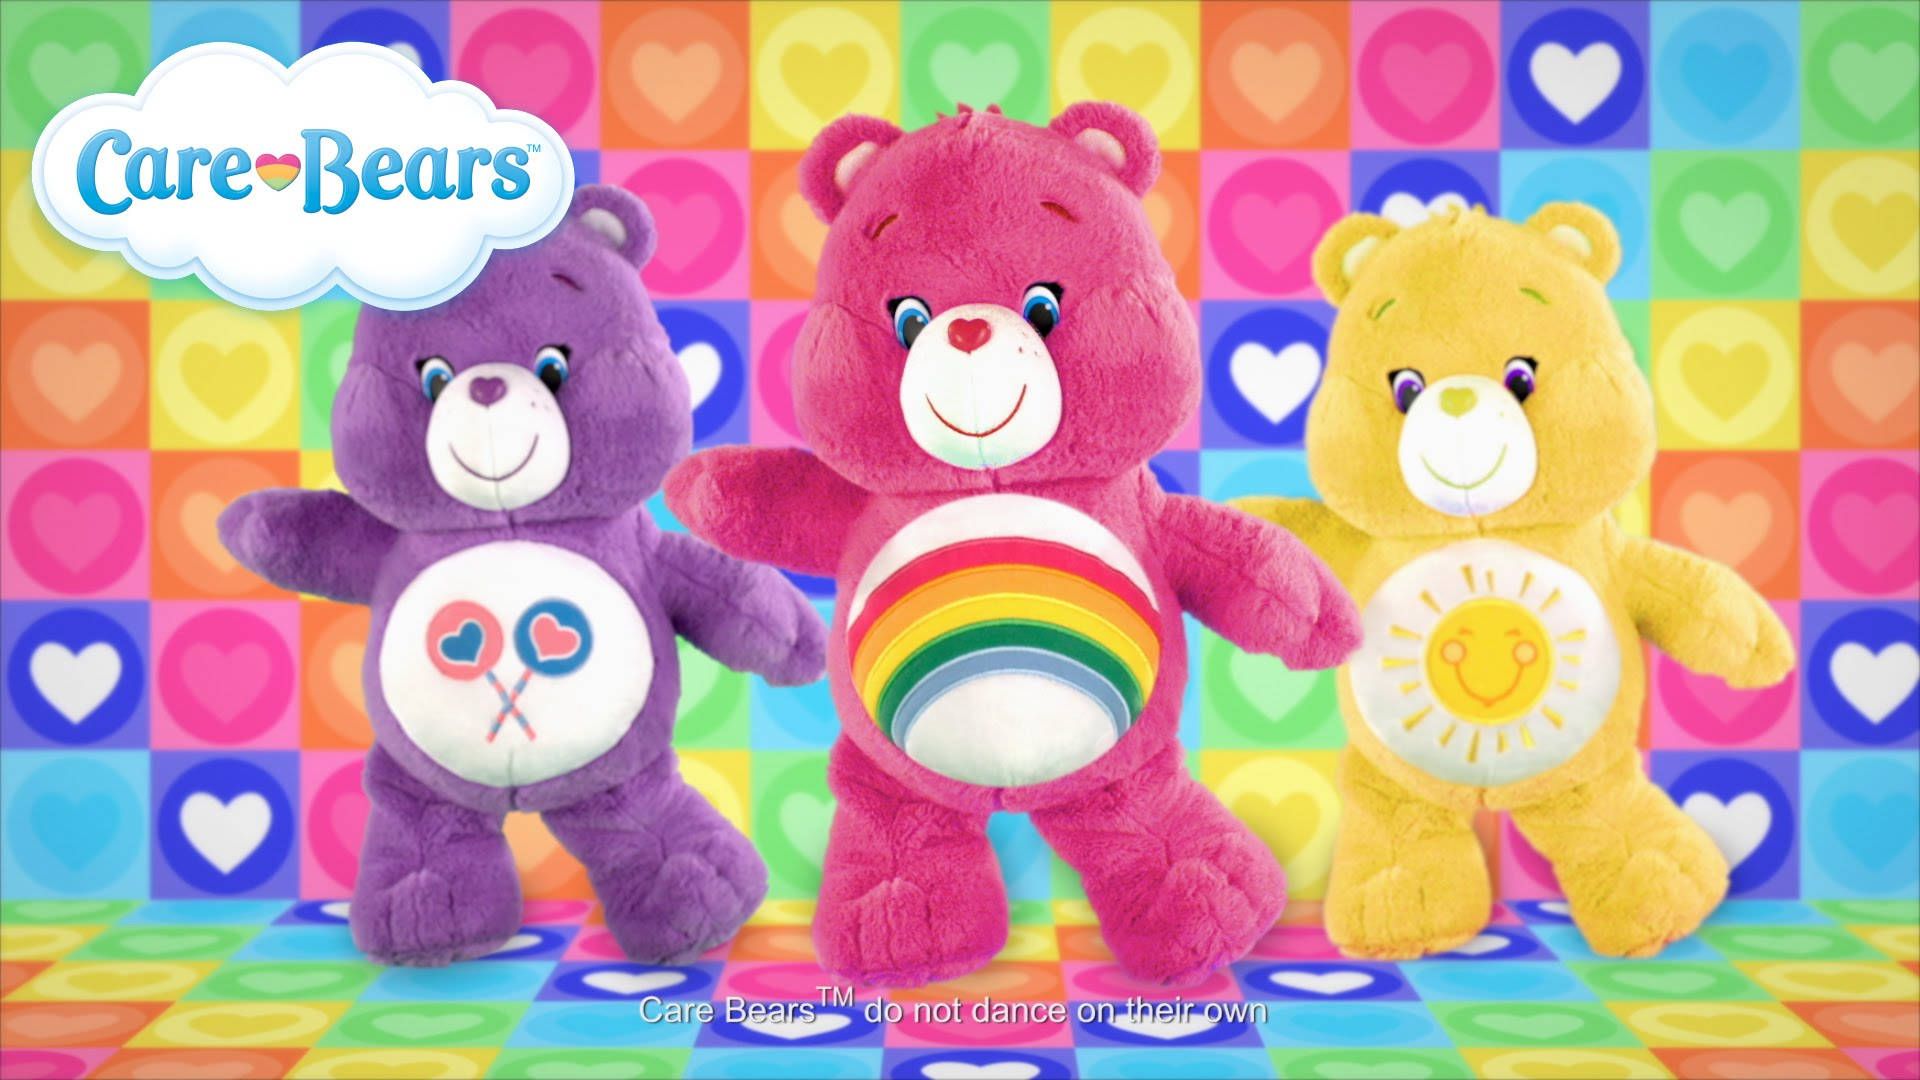 Free Care Bears Wallpaper Downloads, Care Bears Wallpaper for FREE